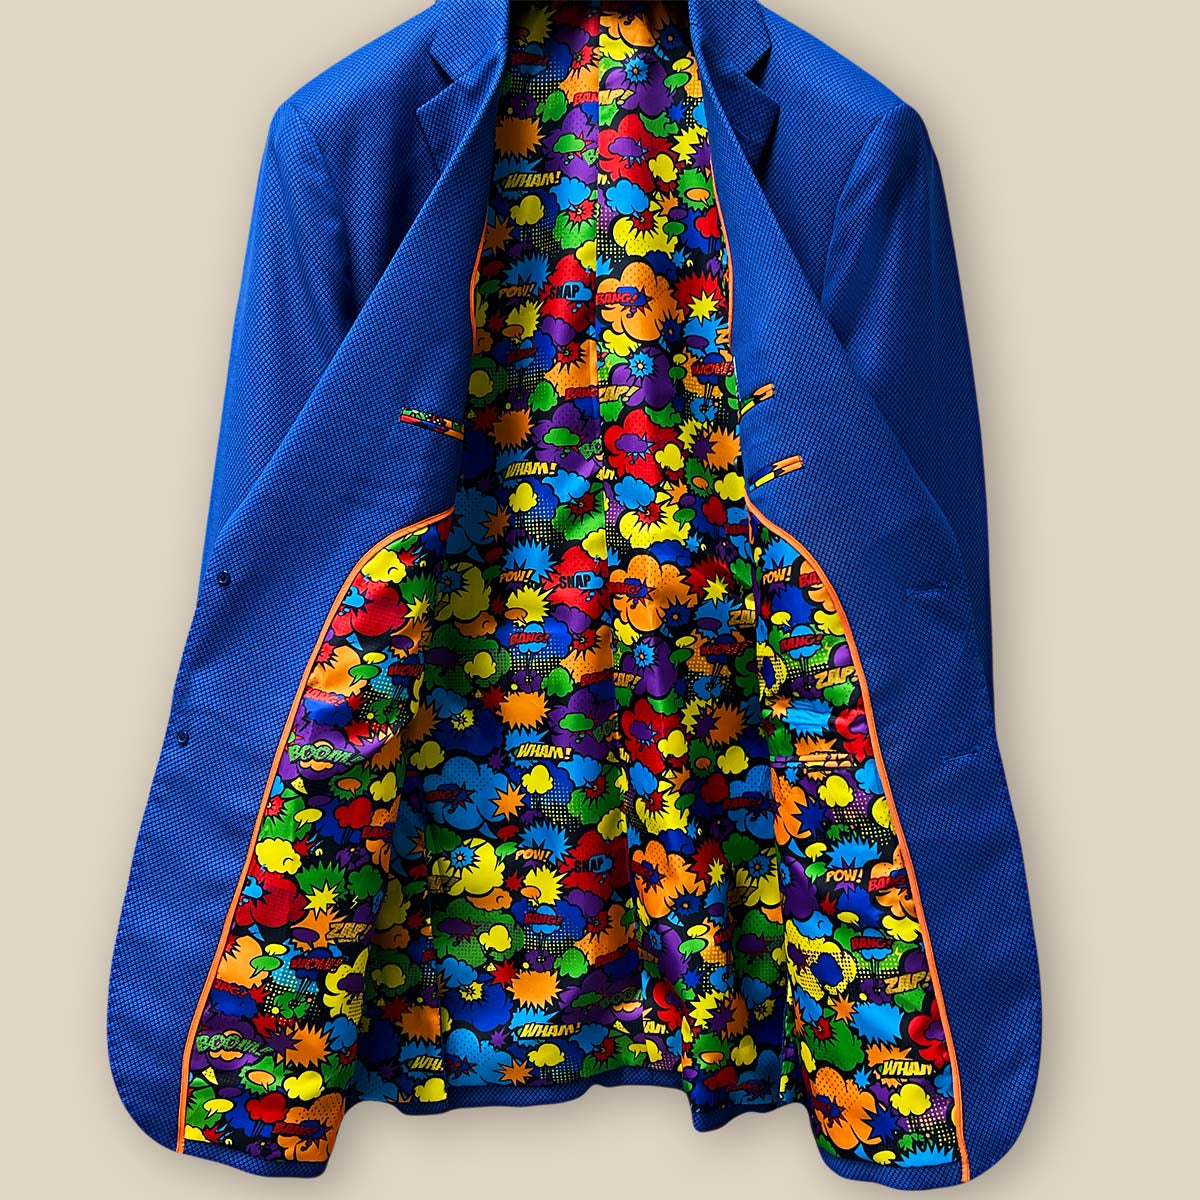 Overall inside view of the sapphire blue men's suit, displaying the comprehensive design and playful comic print lining.